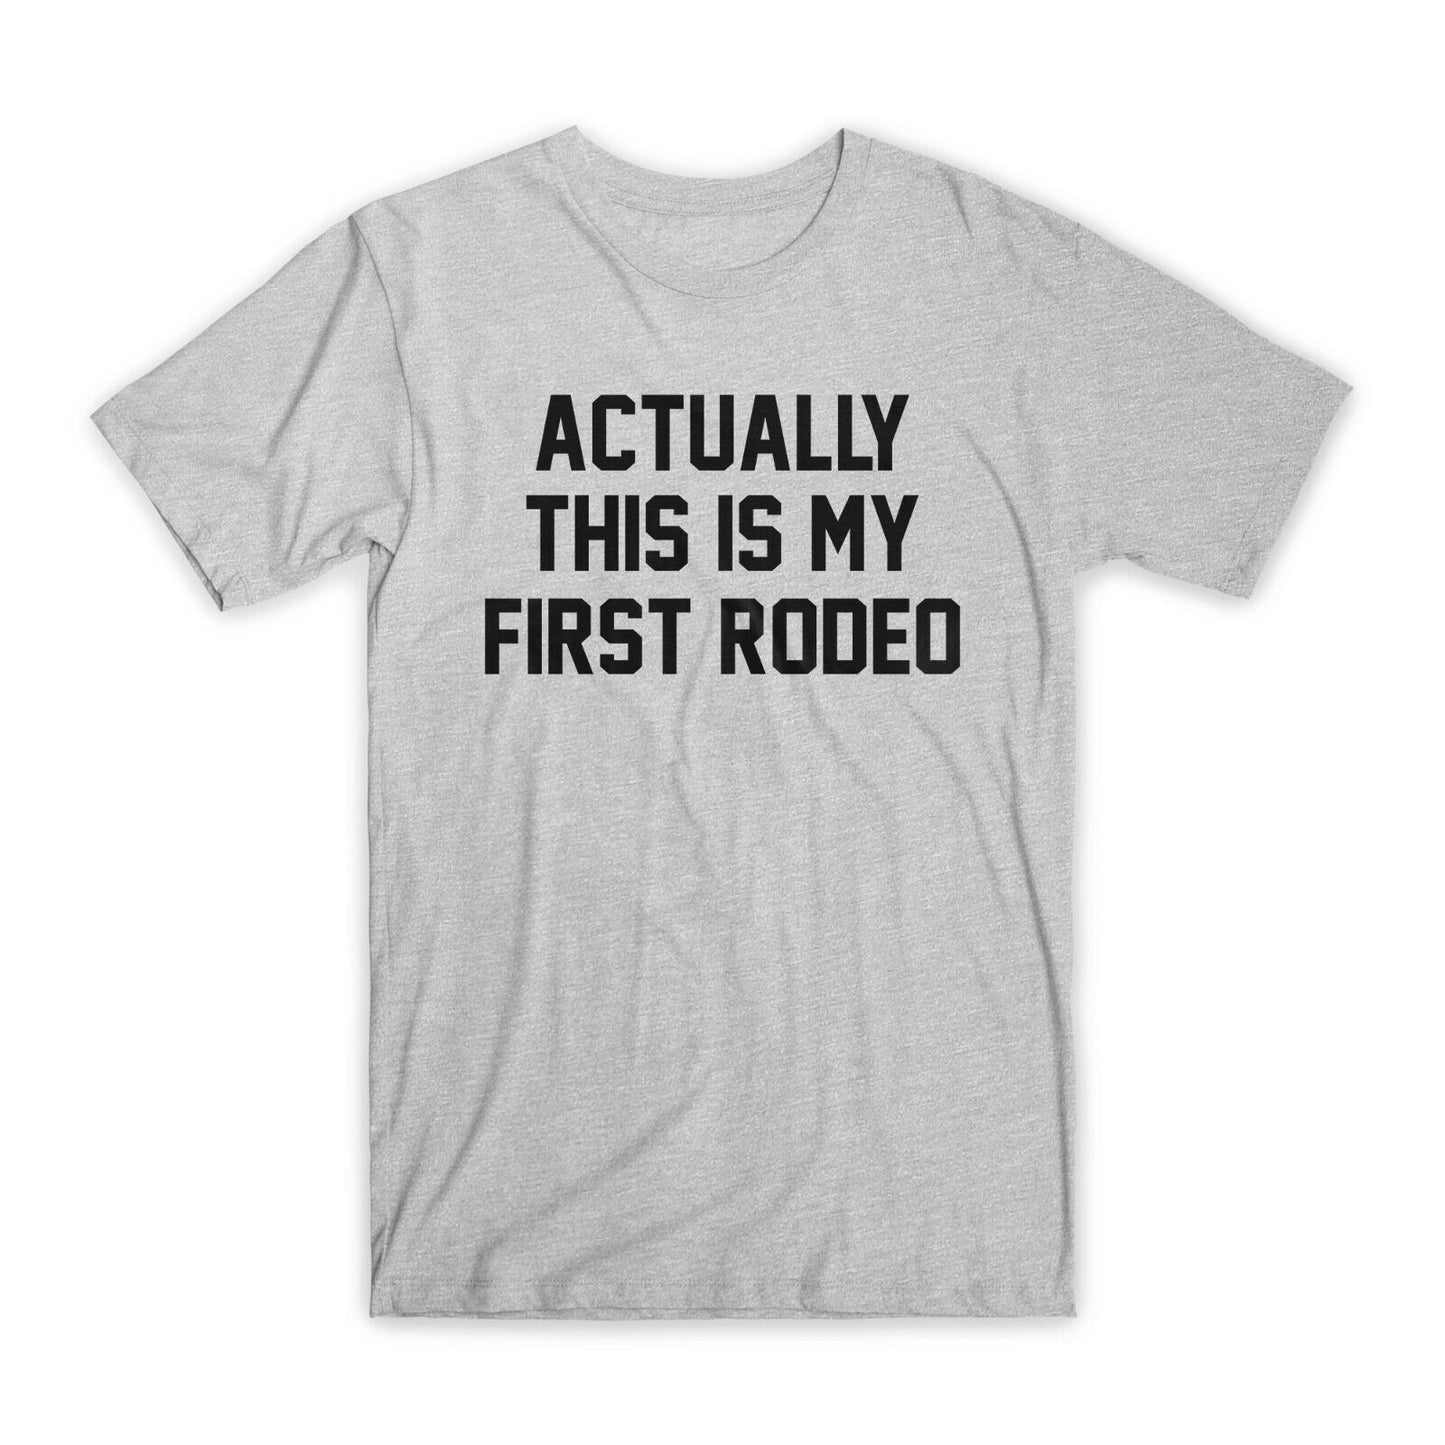 Actually This is My First Rodeo T-Shirt Soft Cotton Funny Tees, Black/Gray NEW